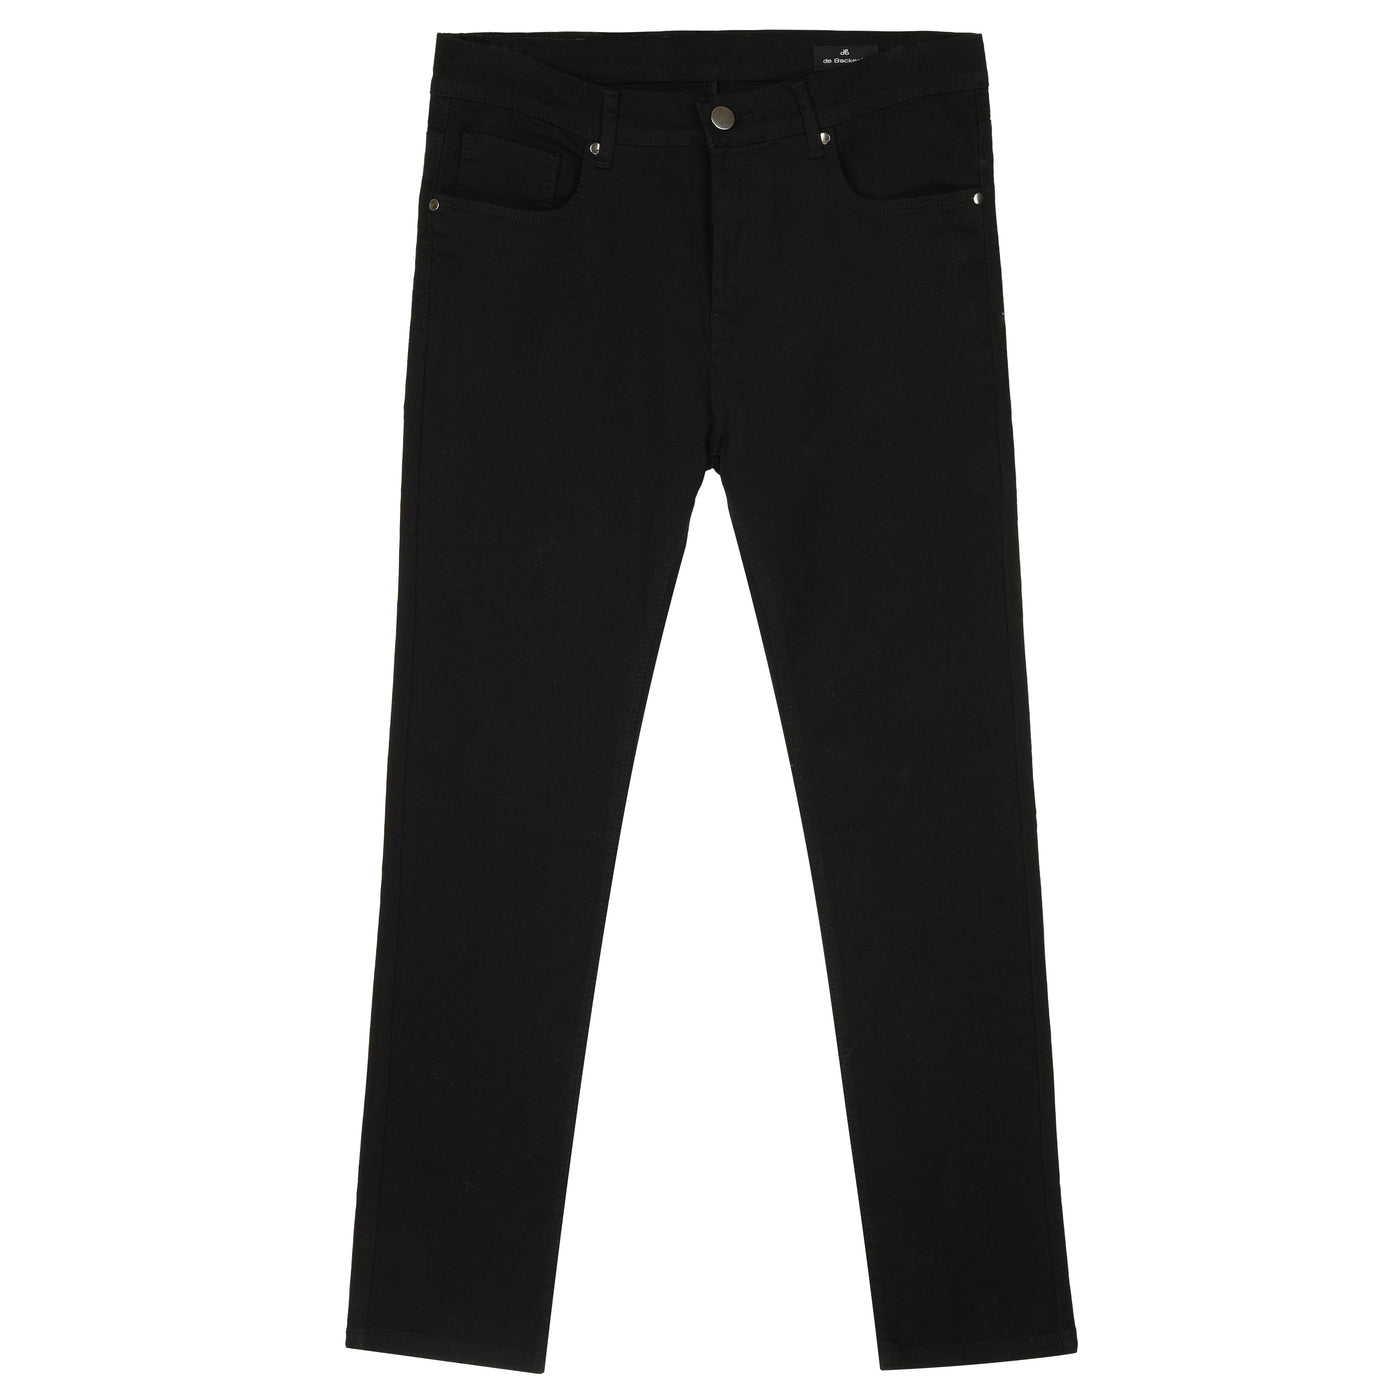 Twill Patterned Black Jeans pant